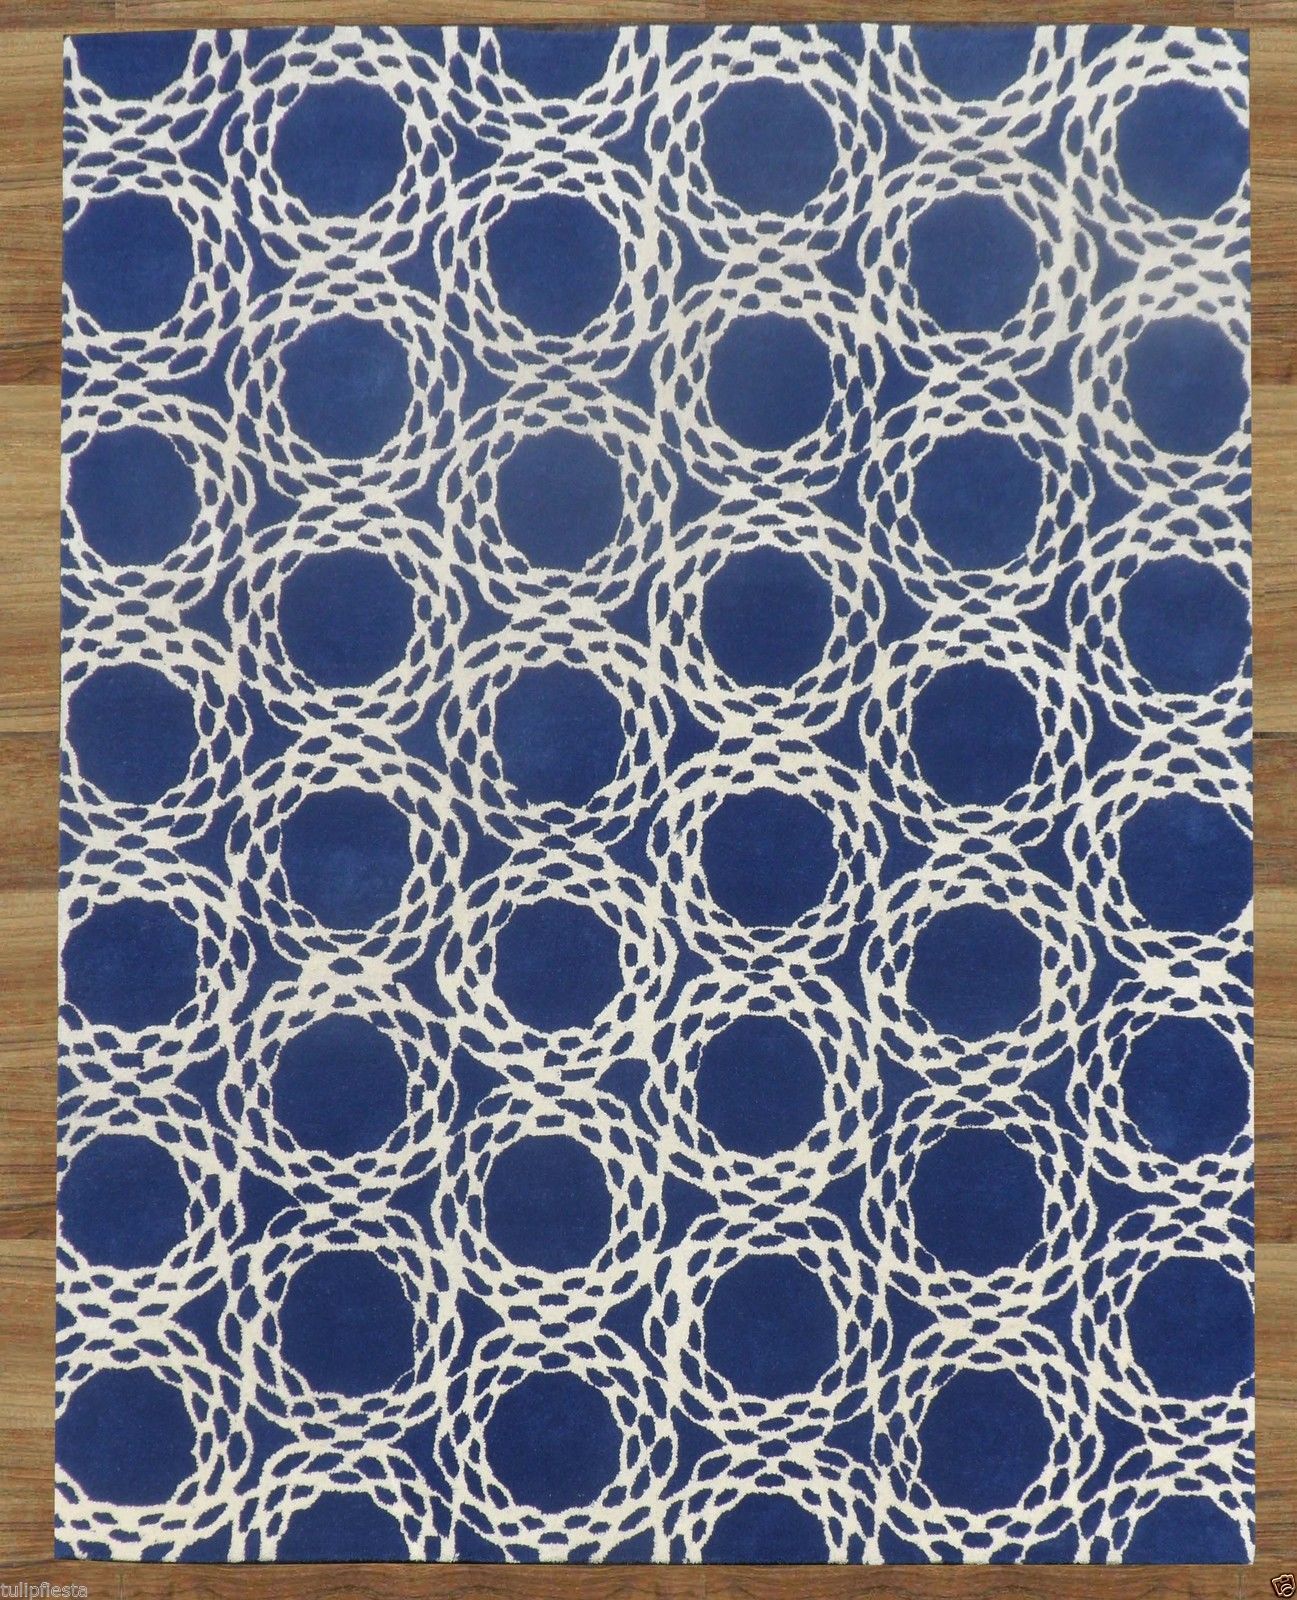 Primary image for Arabesque Scroll Blue 5' x 8'  Handmade 100% Wool Area Rug 2000-Now and Floral